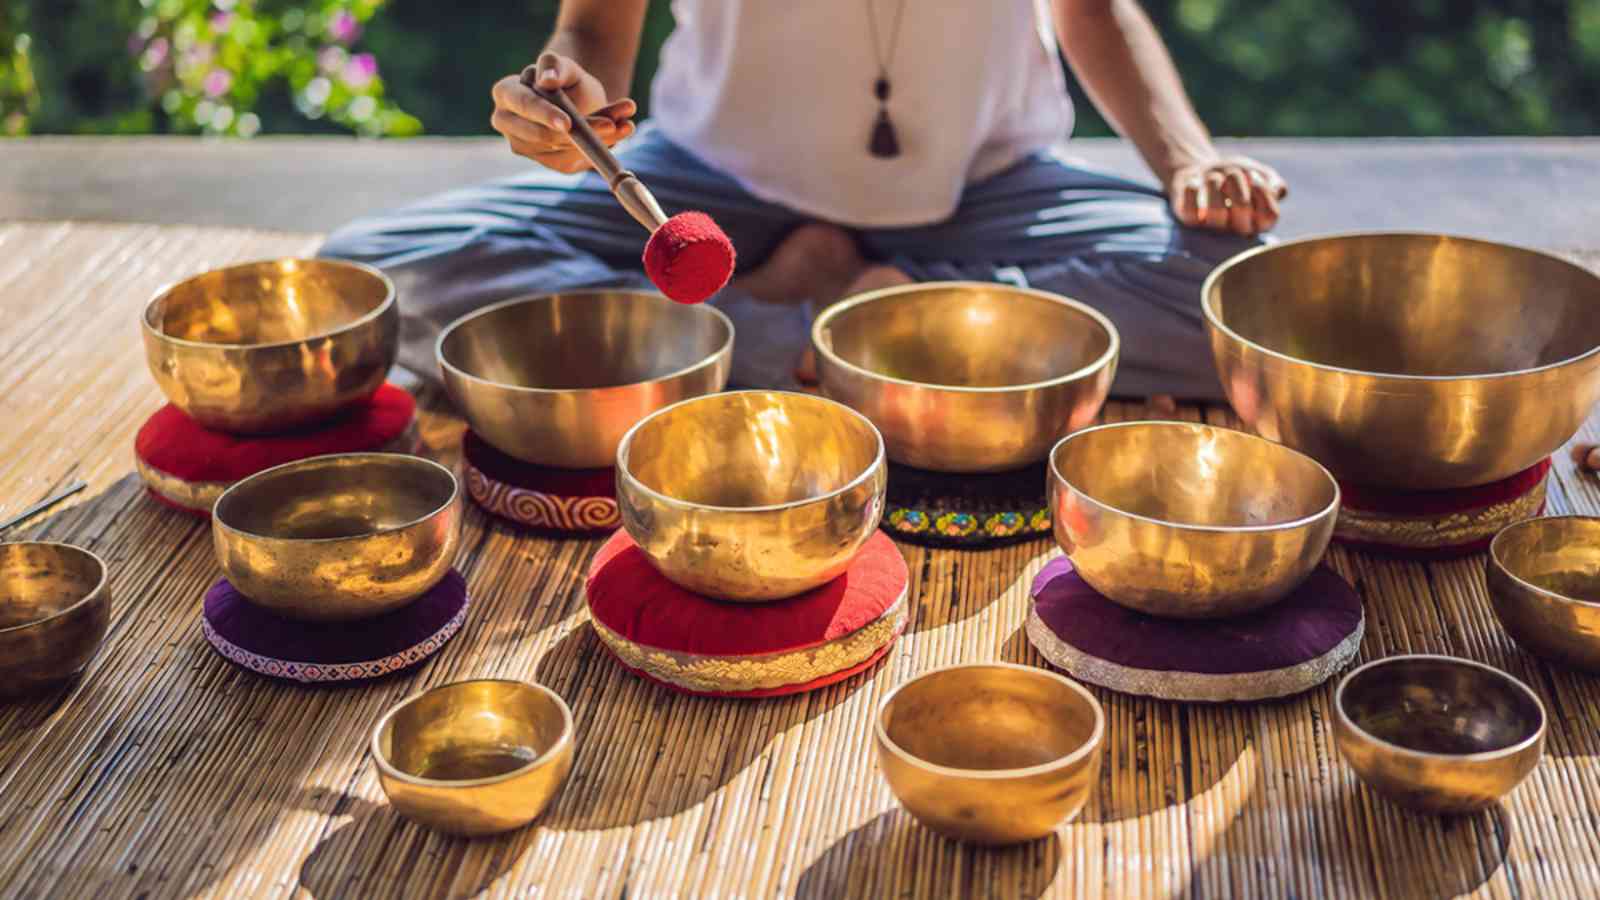 World Sound Healing Day 2023: Date, History, Significance